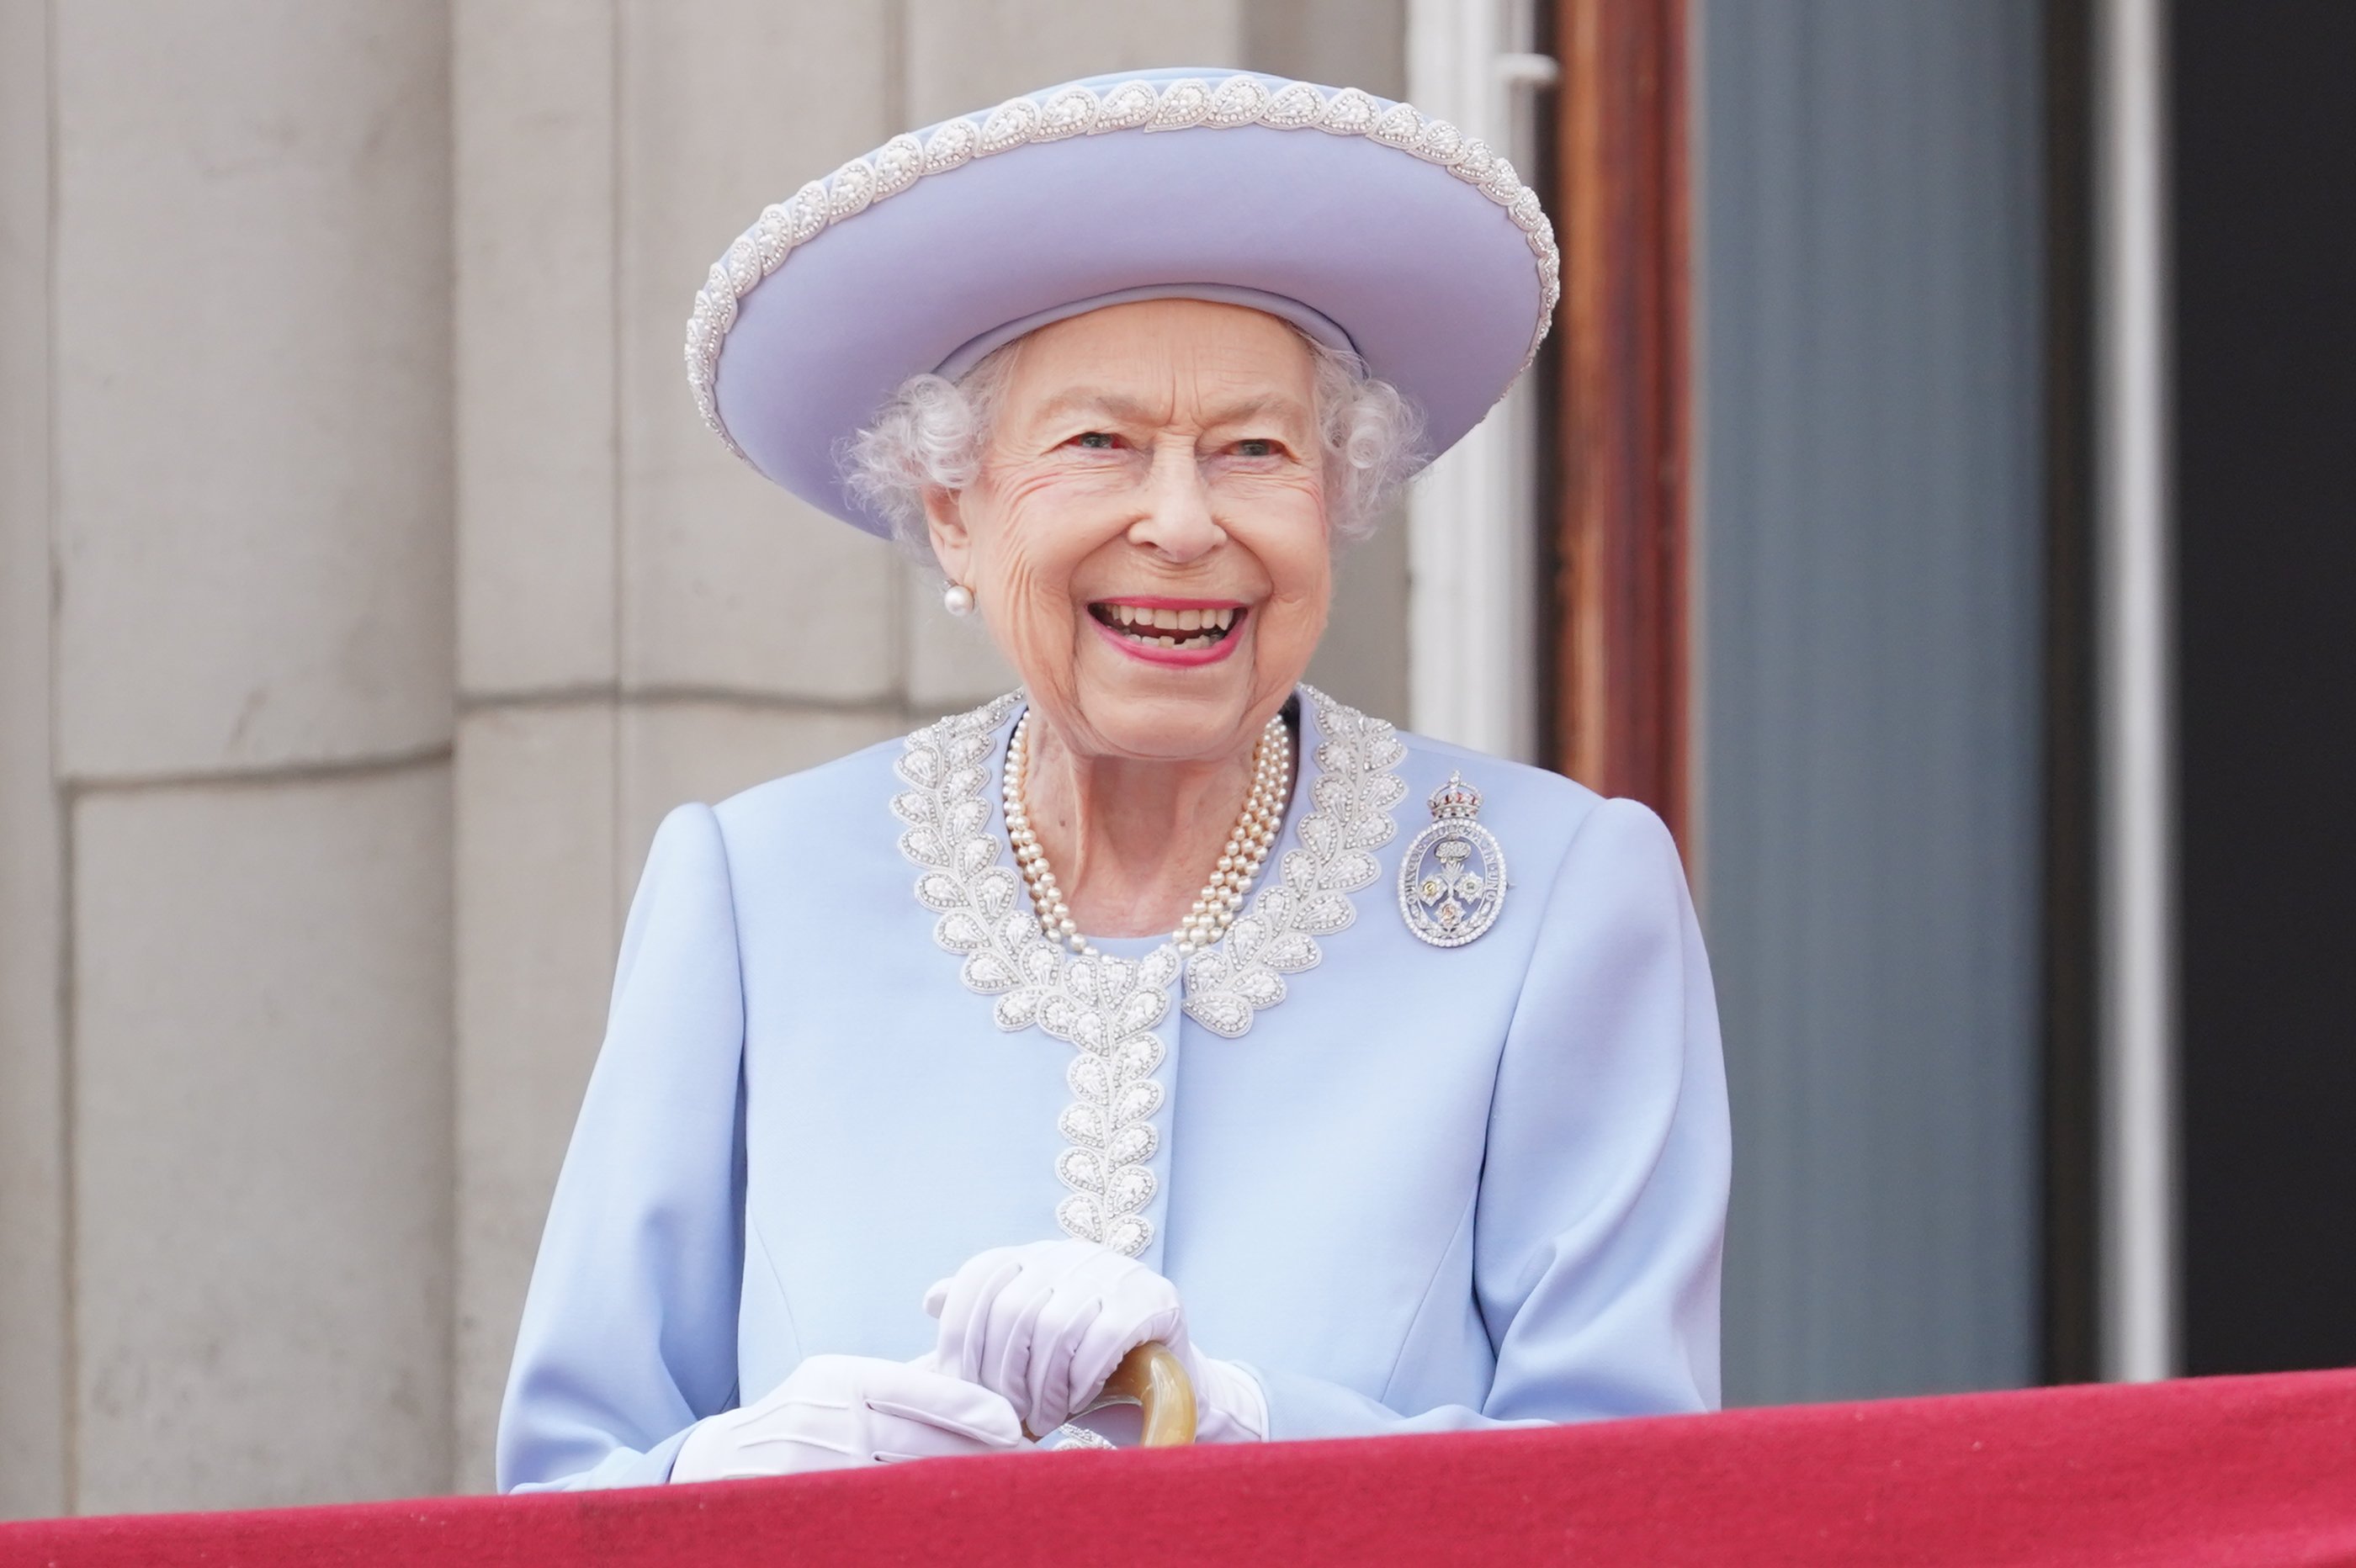 Queen Elizabeth II watches from the balcony of Buckingham Palace during the Trooping the Colour parade on June 2, 2022, in London, England. | Source: Getty Images